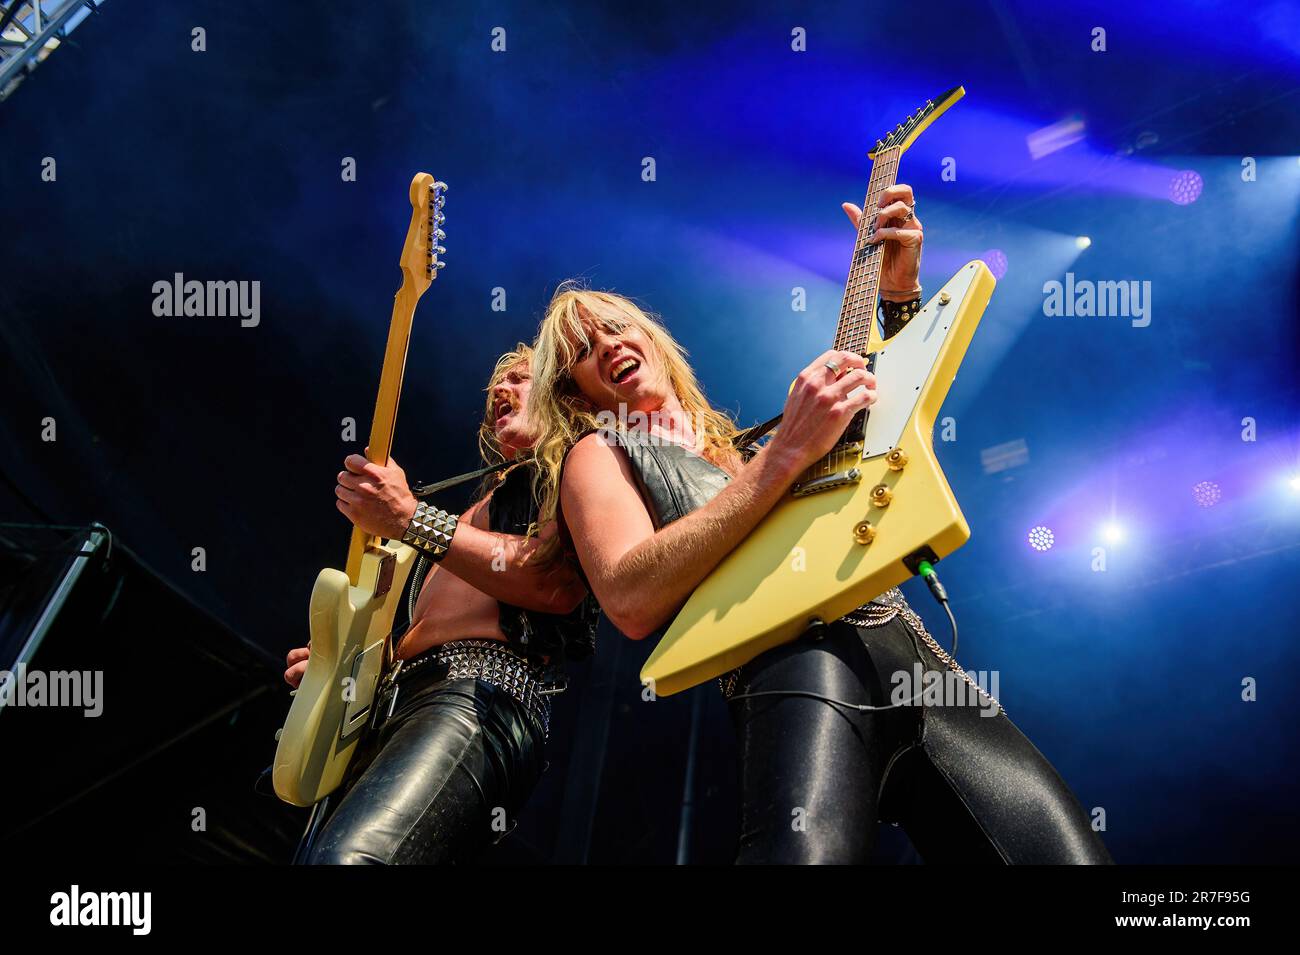 Copenhagen, Denmark. 14th June, 2023. The Swedish heavy metal band Enforcer performs a live concert during the Danish heavy metal festival Copenhell 2023 in Copenhagen. Here vocalist and guitarist Olof Wikstrand (R) is seen live on stage with guitarist Jonathan Nordwall (L). (Photo Credit: Gonzales Photo/Alamy Live News Stock Photo